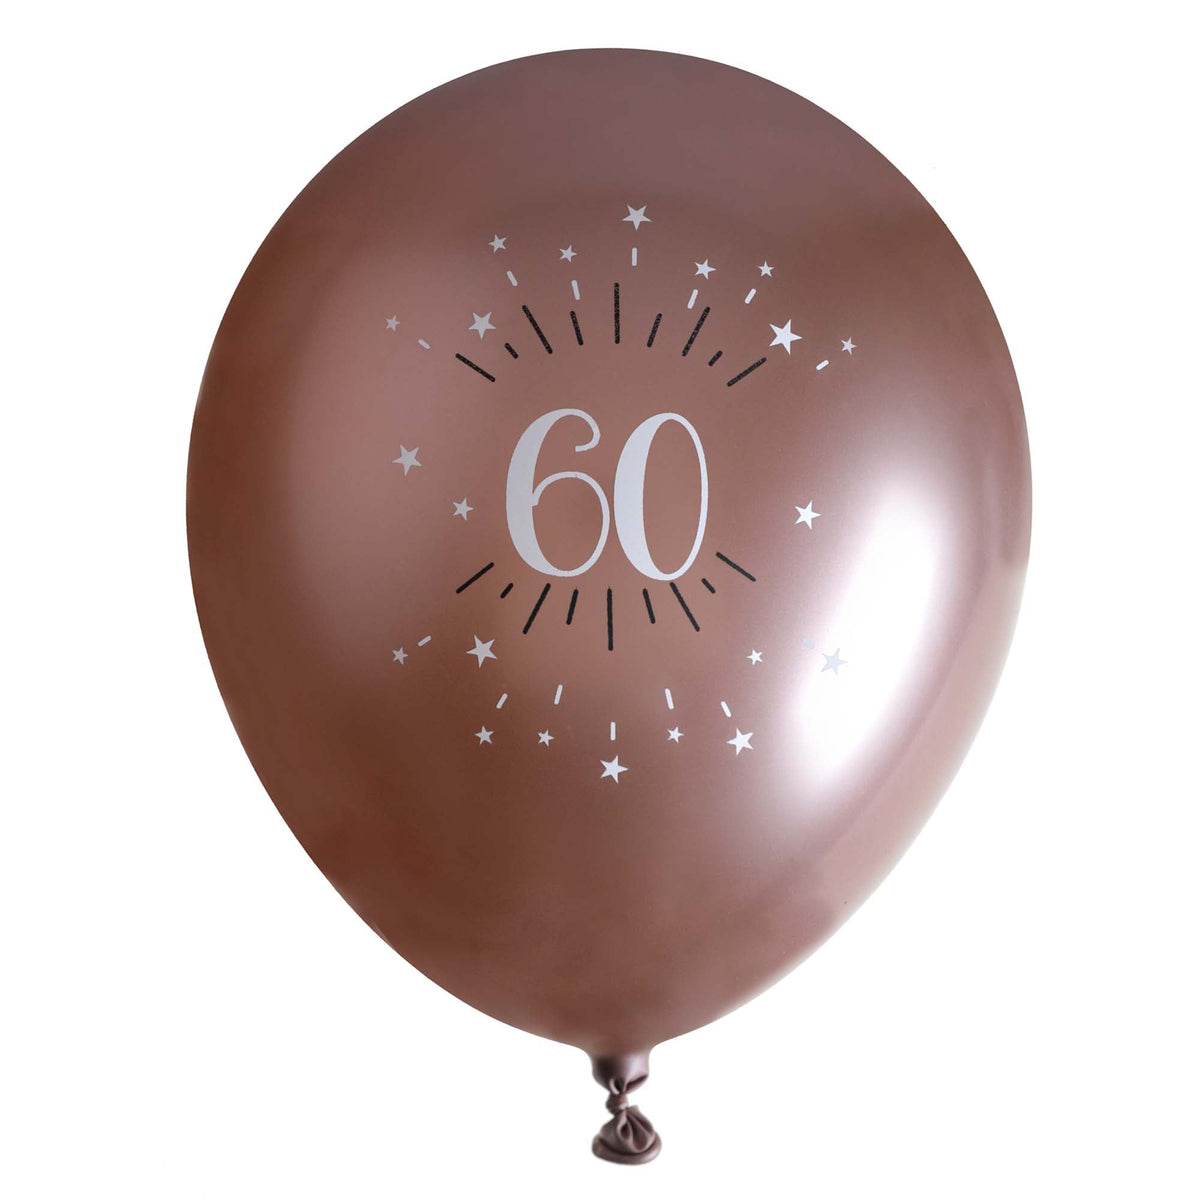 SANTEX Age Specific Birthday Rose Gold 60th Birthday Latex Balloons, 12 Inches, 6 Count 3660380071297